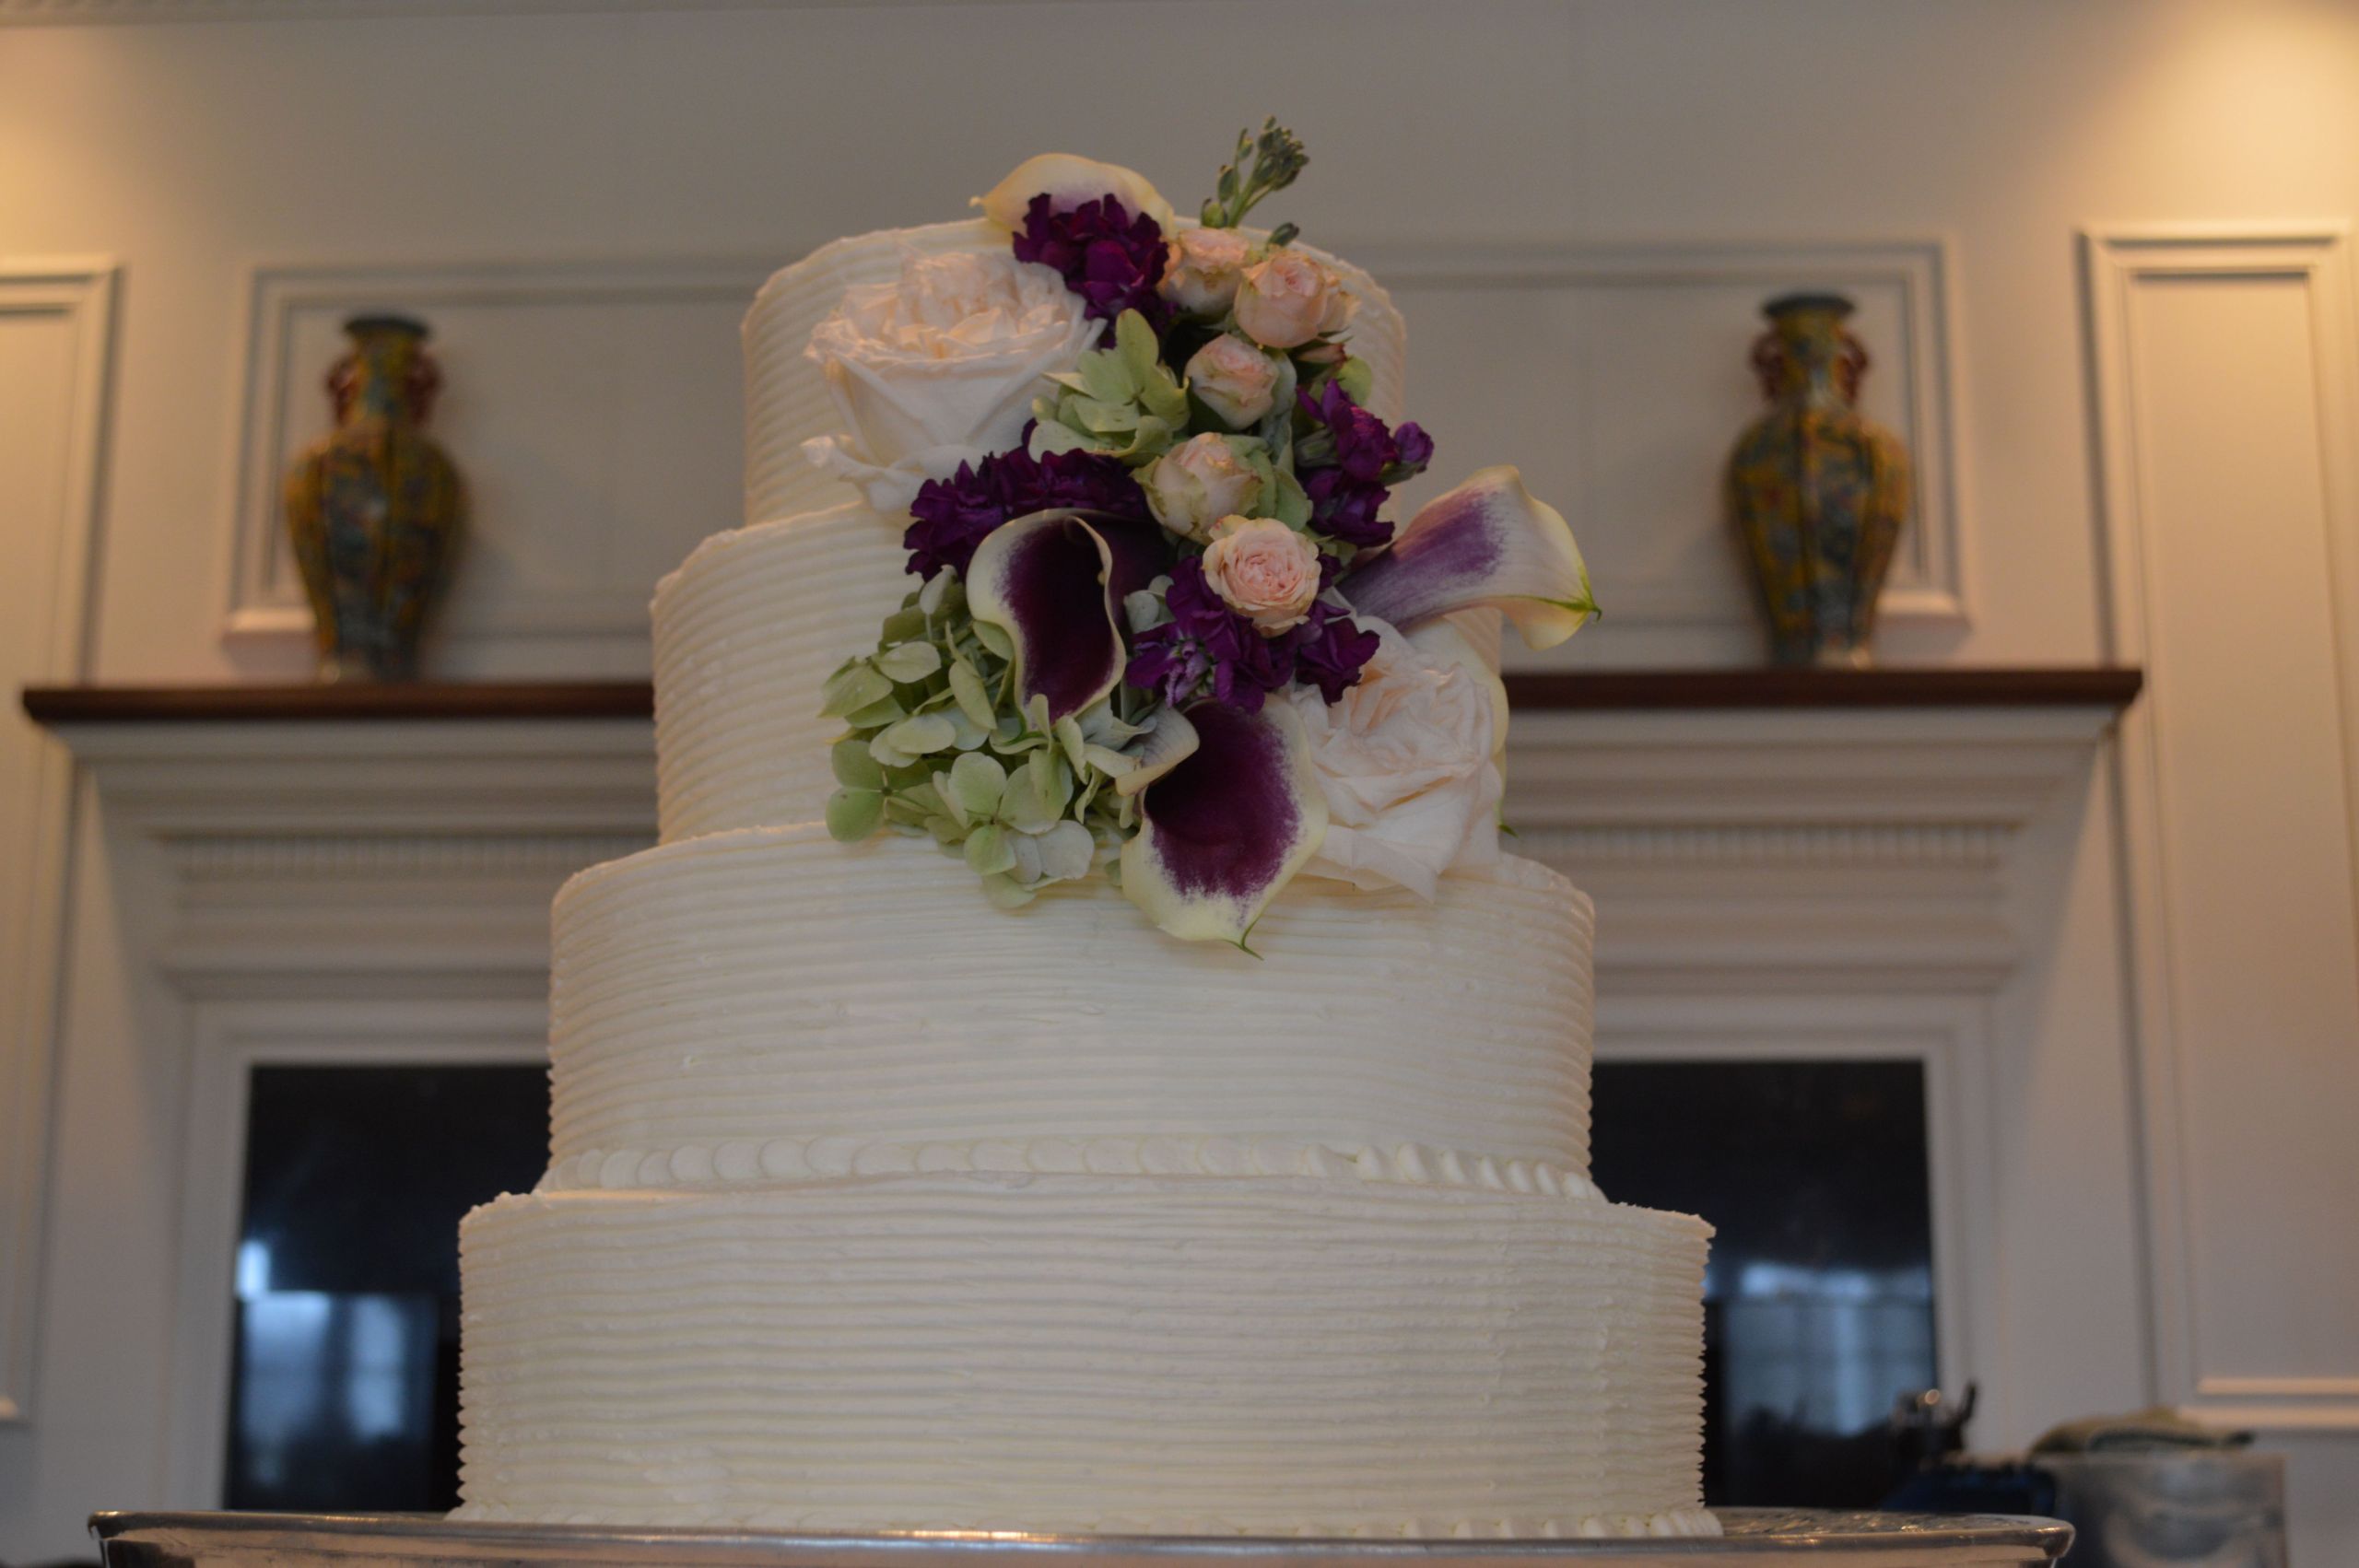 Wedding Cakes Fort Wayne
 rb weddings Cake by Fort Wayne Country Club With